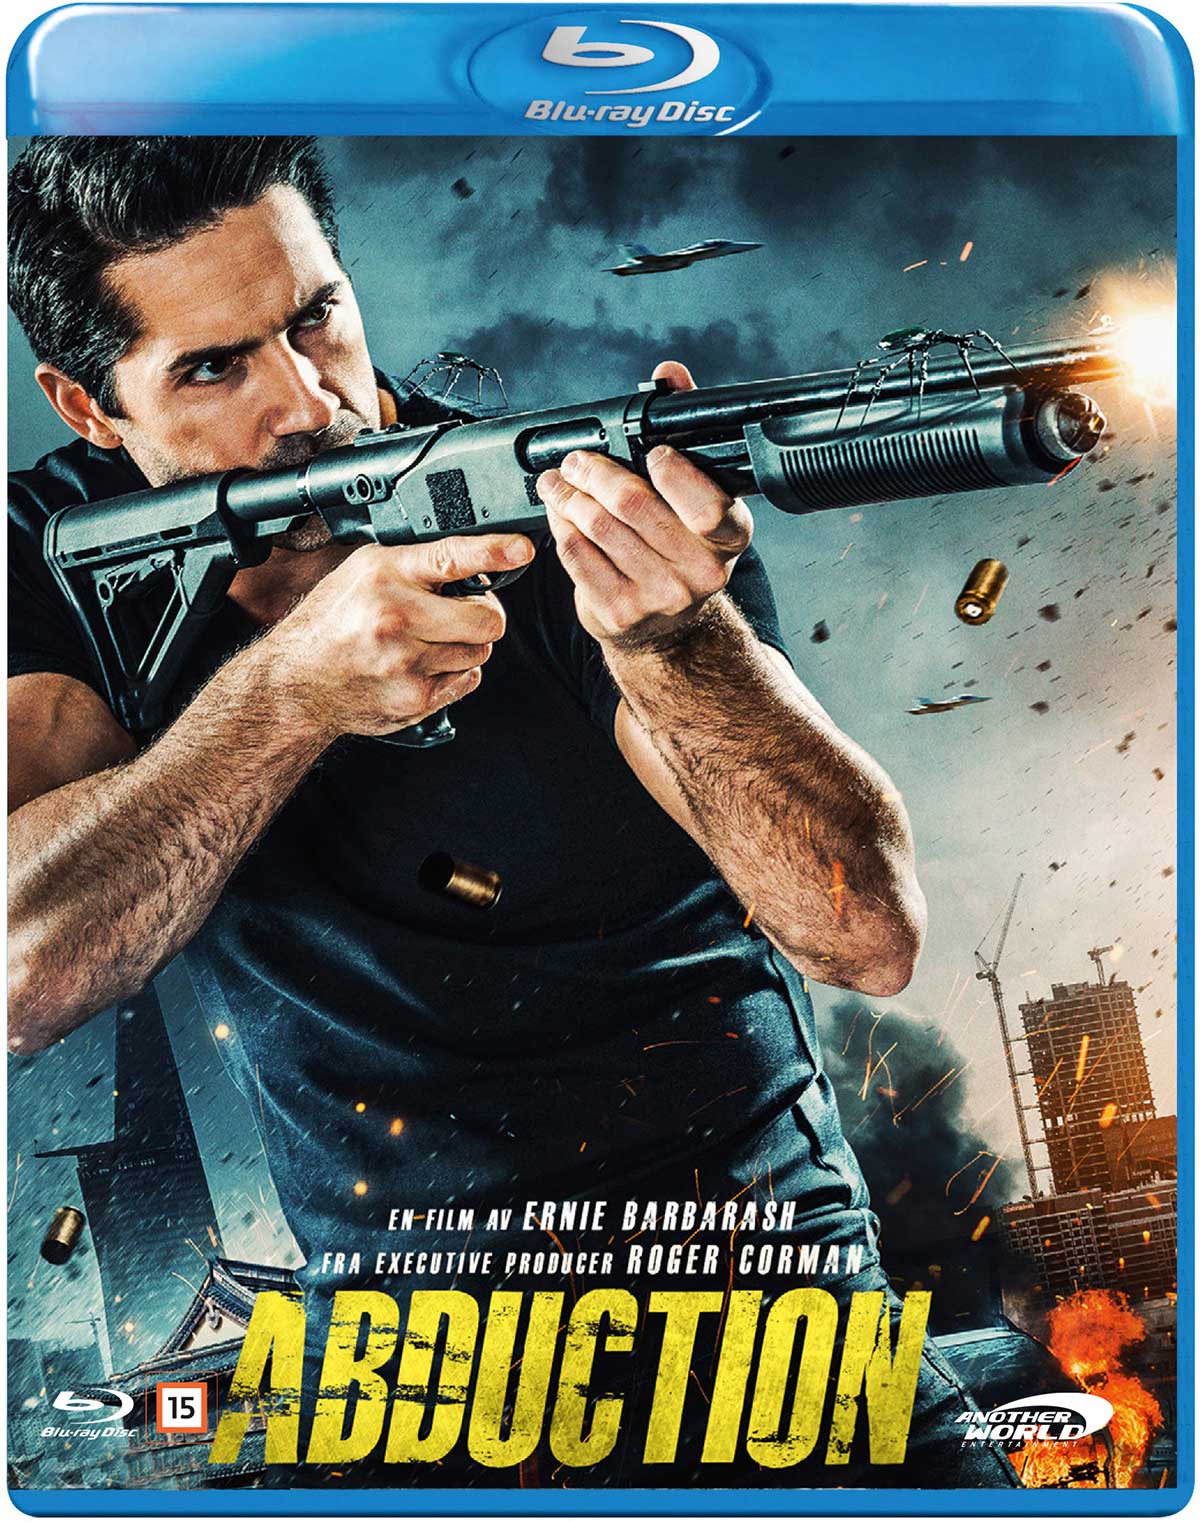 abduction_blu-ray-front-7035534110072